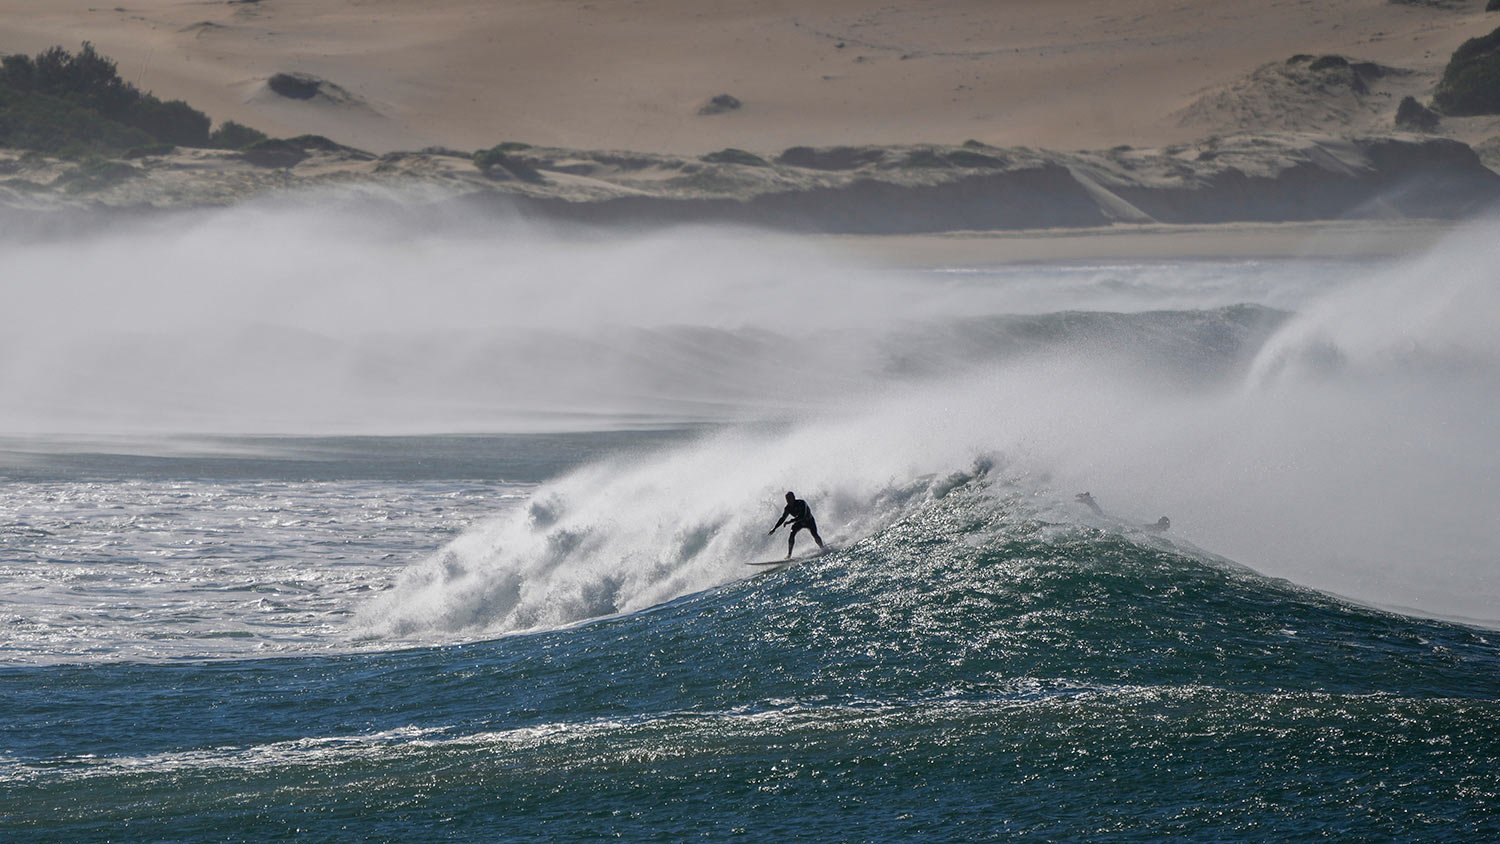  A surfer rides a wave at One Mile Beach at Port Stephens, Australia, Sunday, June 12, 2022. (AP Photo/Mark Baker) 